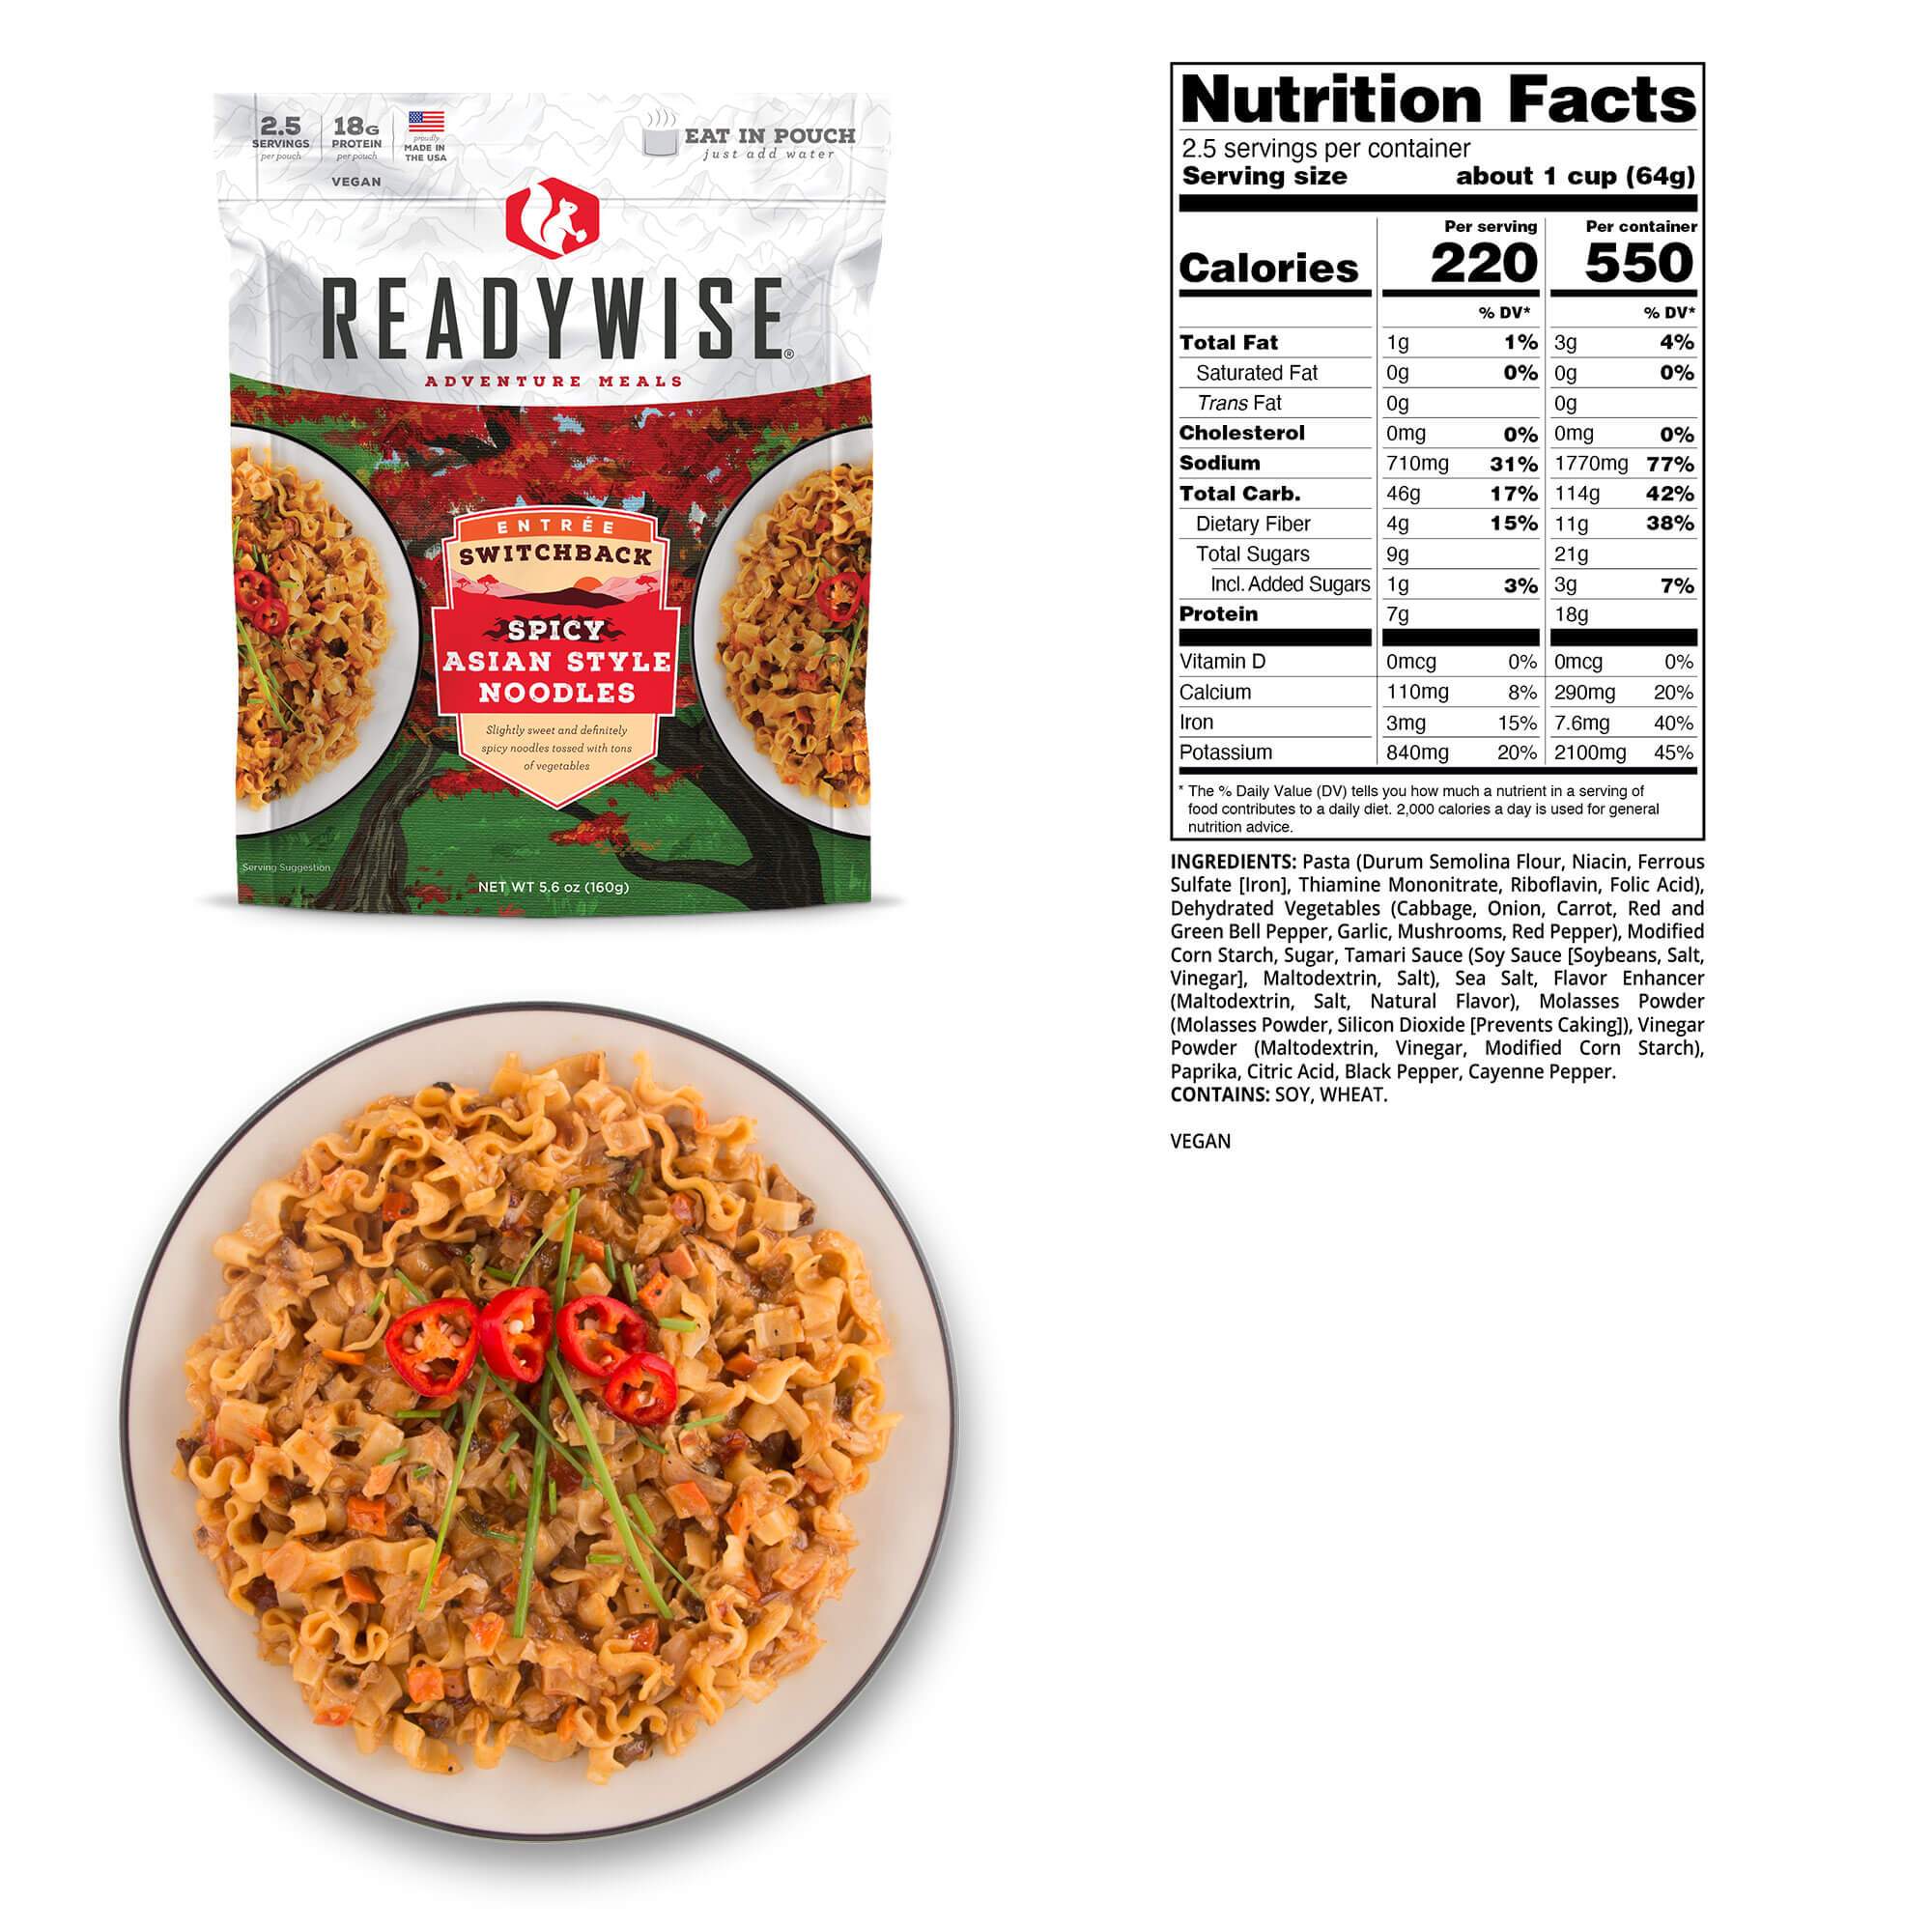 A package of ReadyWise (formerly Wise Food Storage) Switchback Spicy Asian Style Noodles - 6 Pack (SHIPS IN 1-2 WEEKS) next to a bowl of pasta.